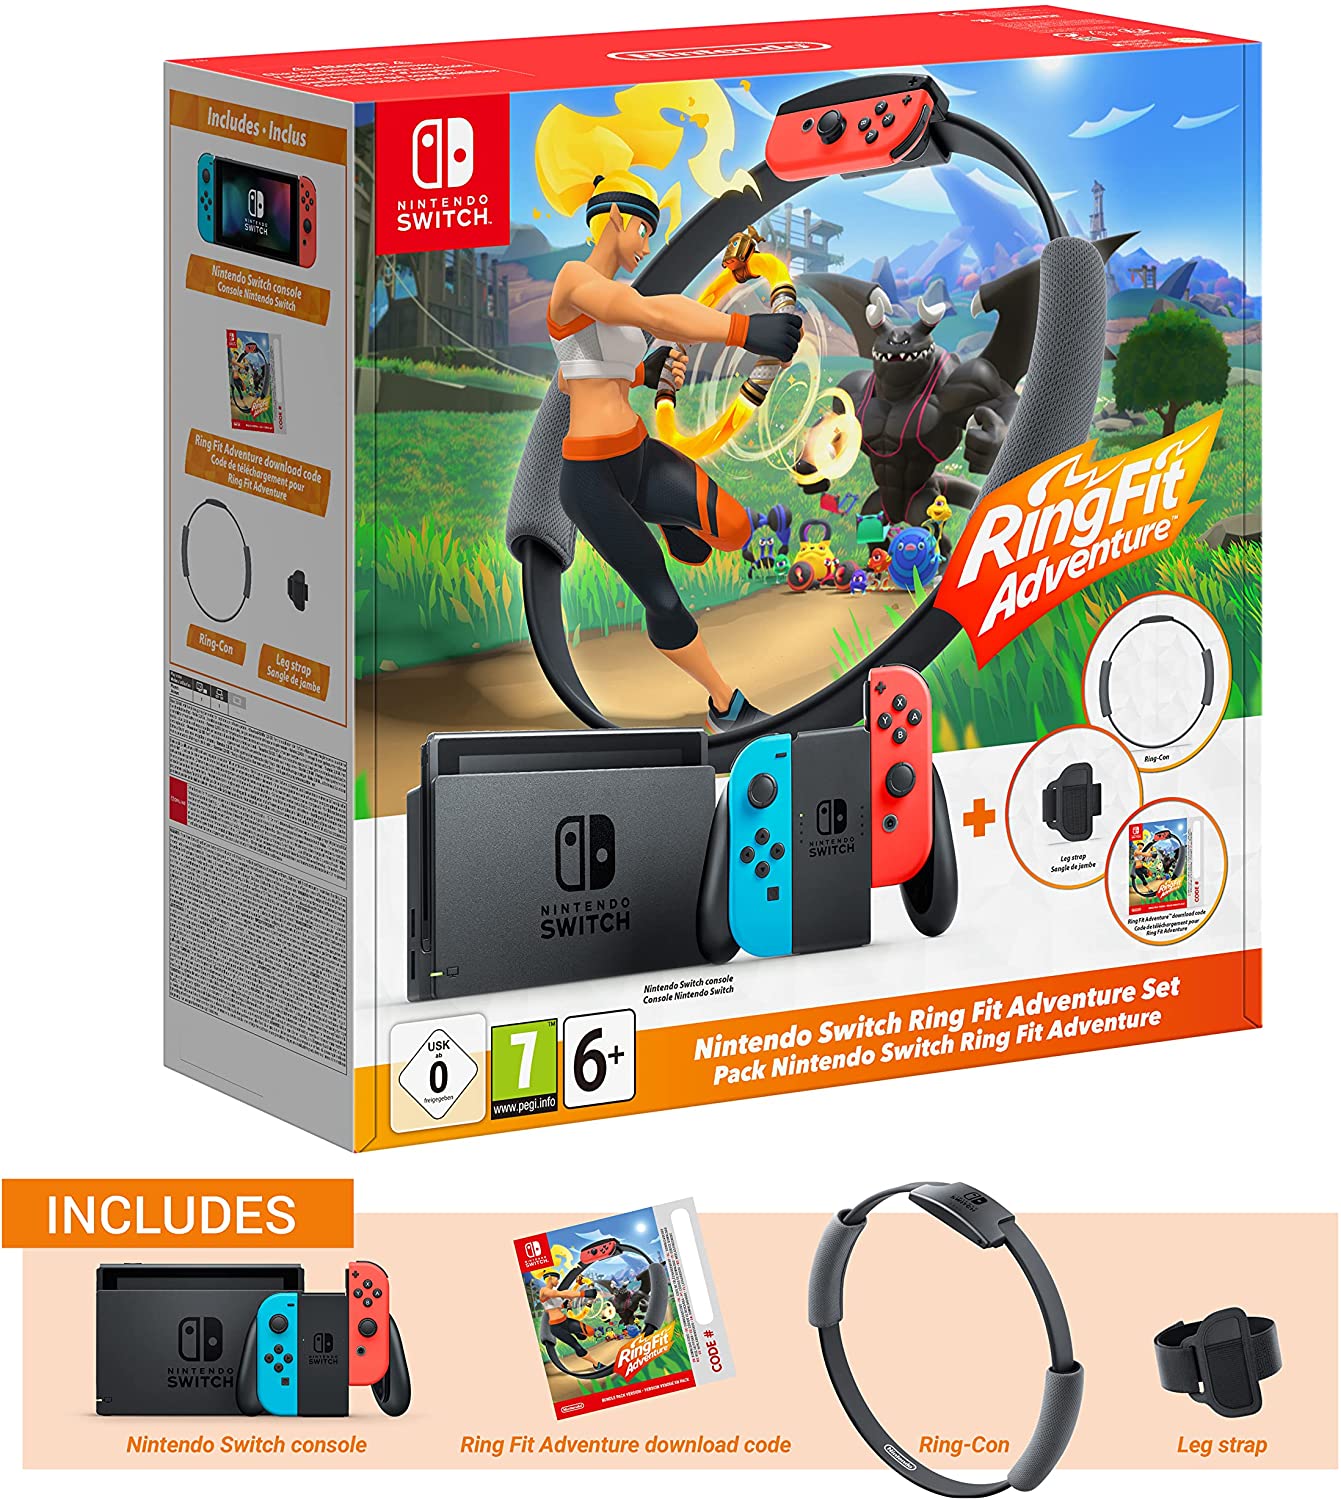 The Nintendo Switch and Ring Fit Adventure bundle